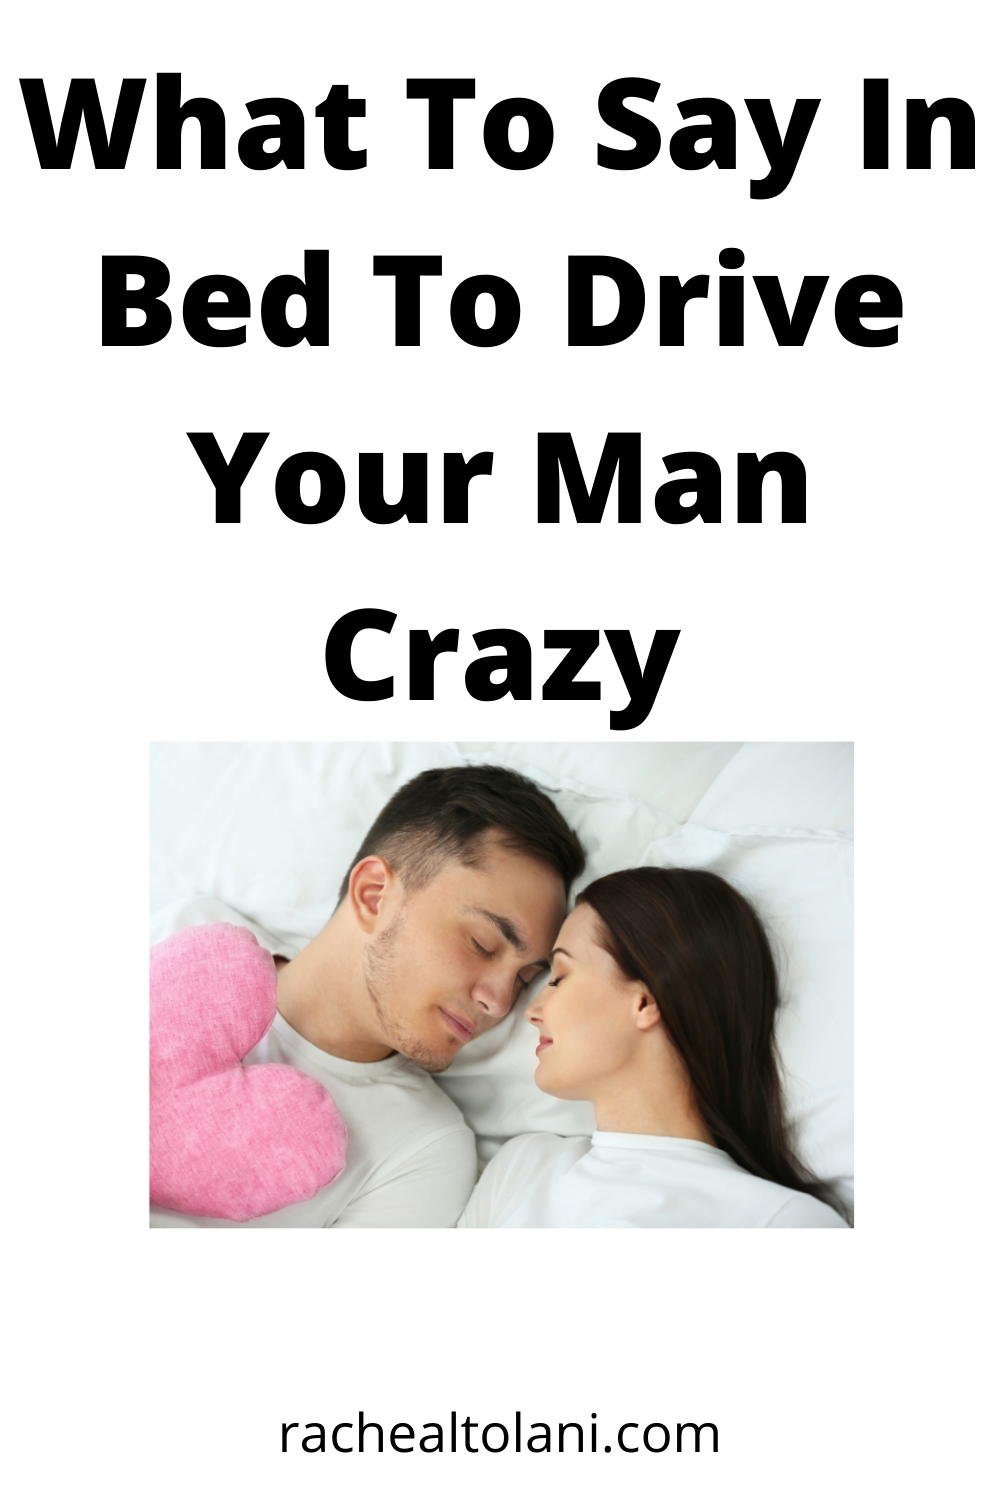 14 Hot Sexy Things to Say In Bed That Will Make Him Crazy -